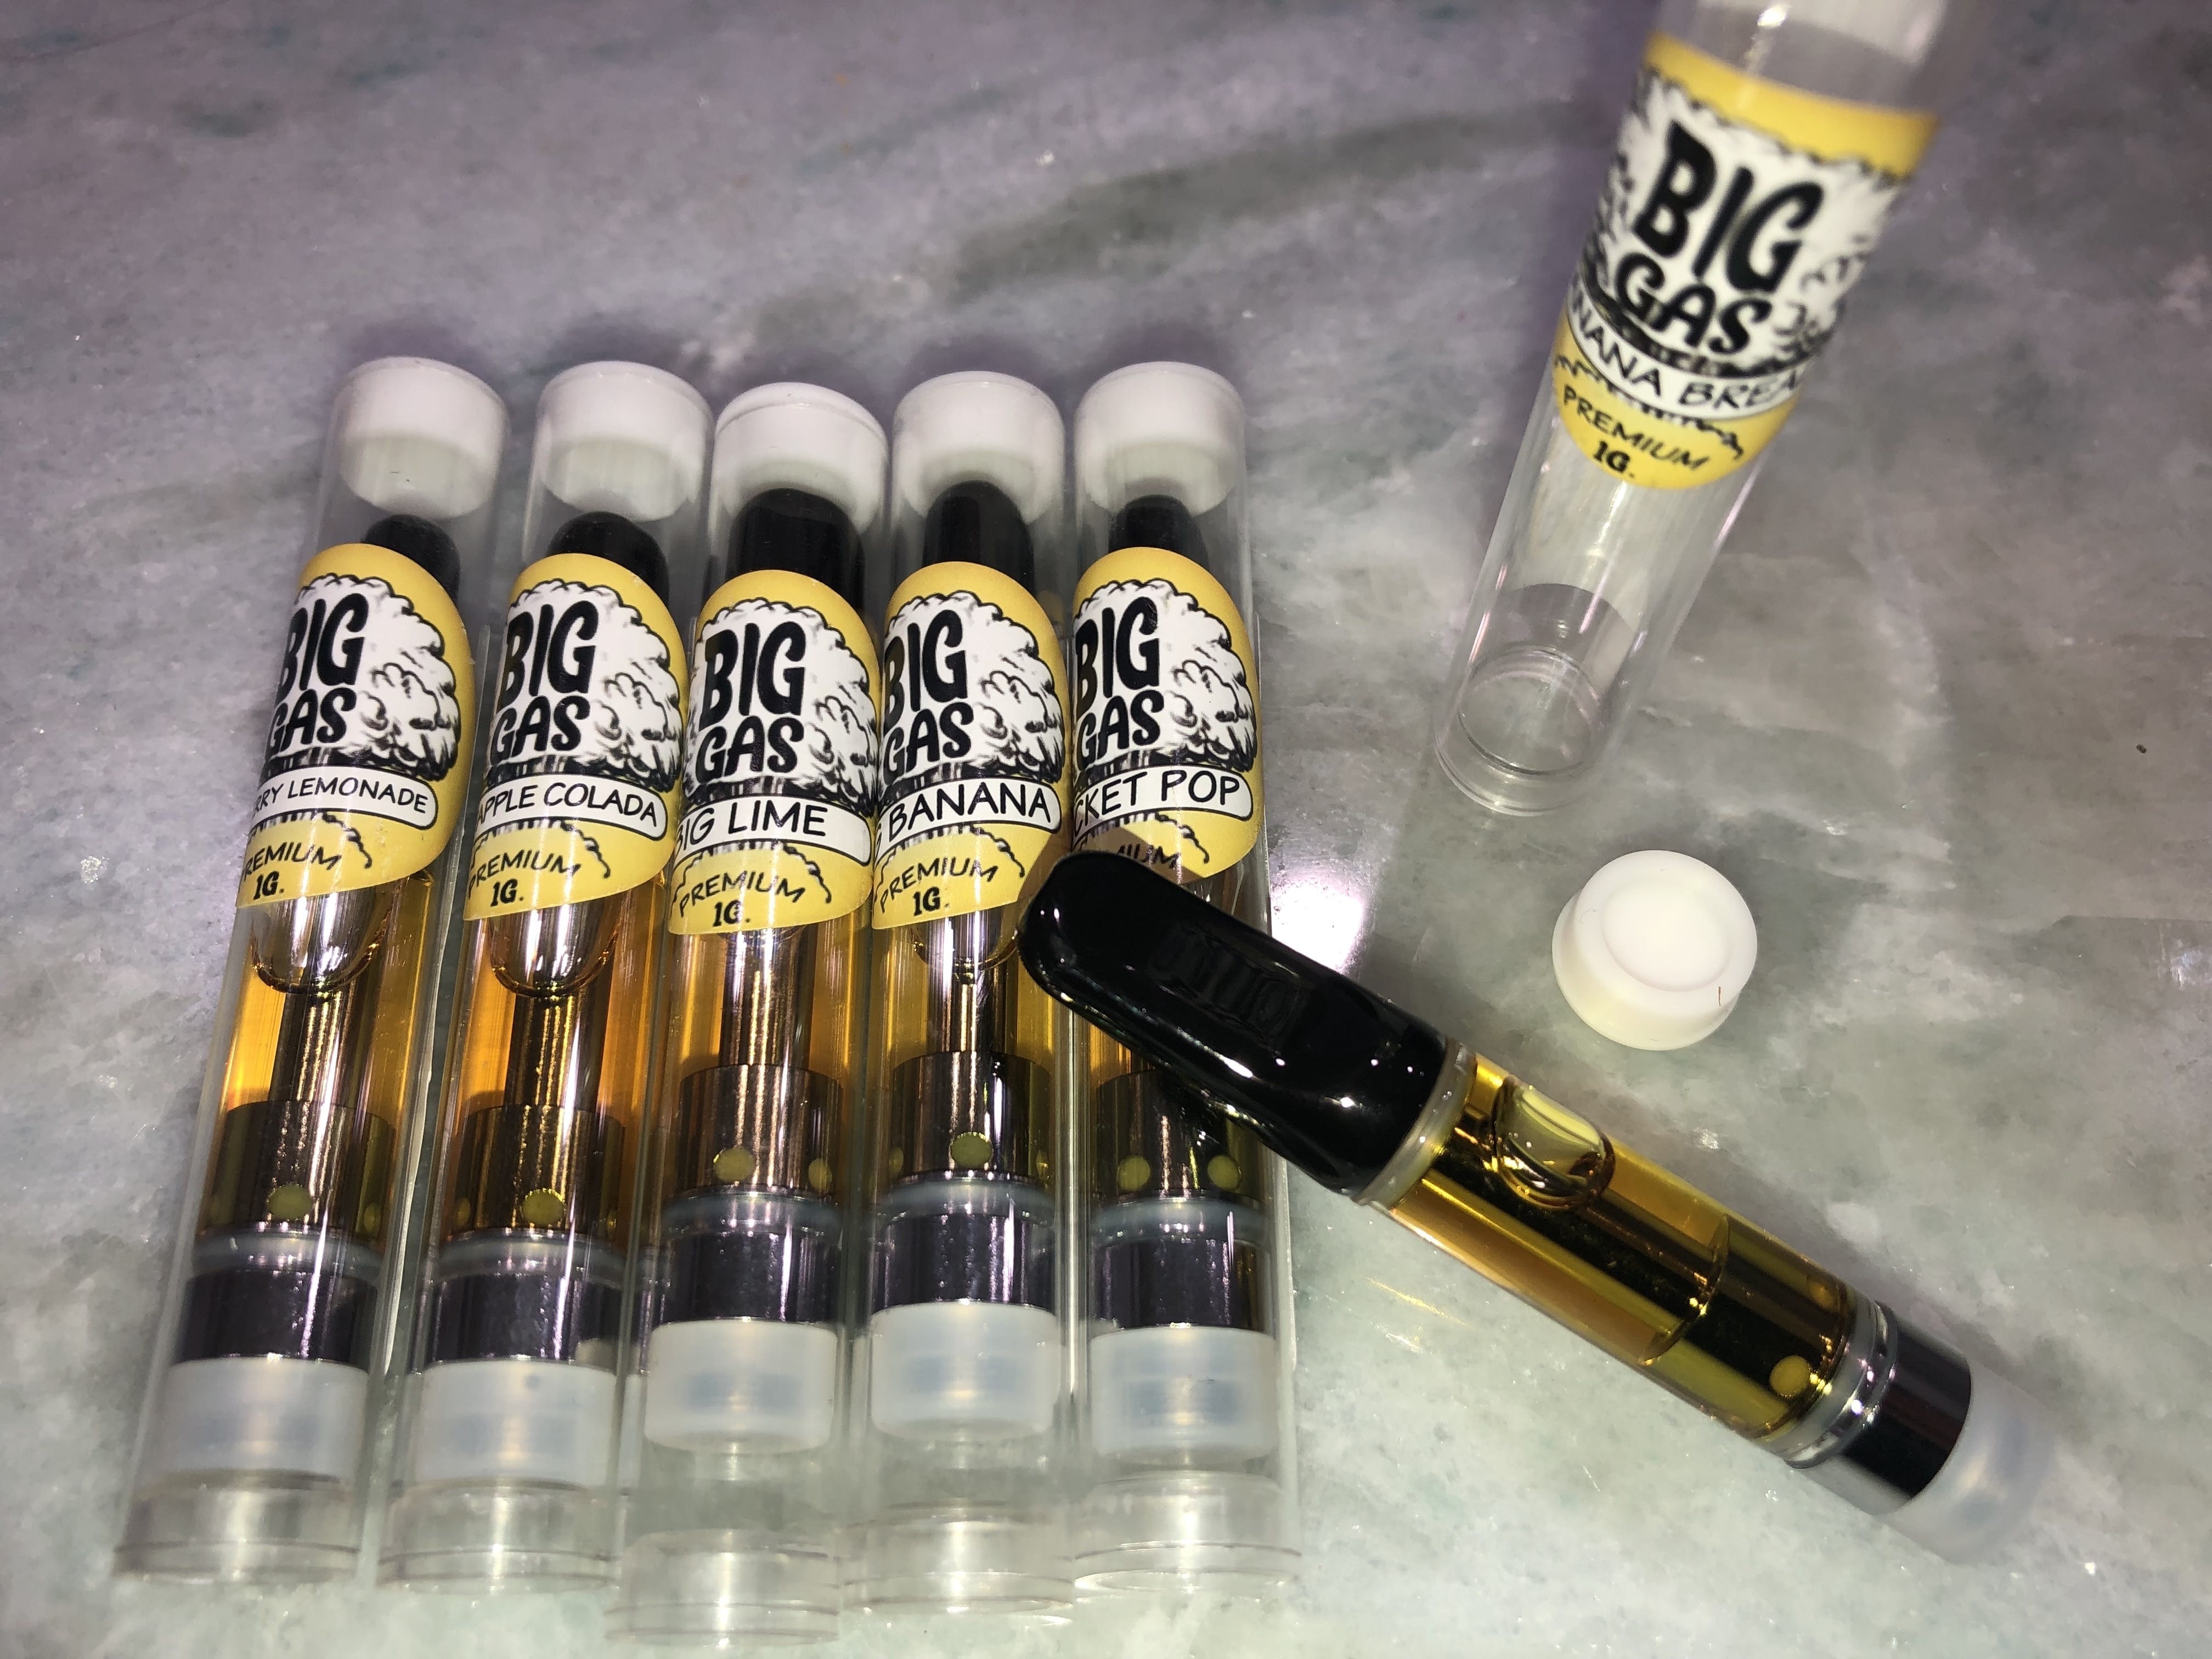 concentrate-big-gas-1g-cartridges-4-24100